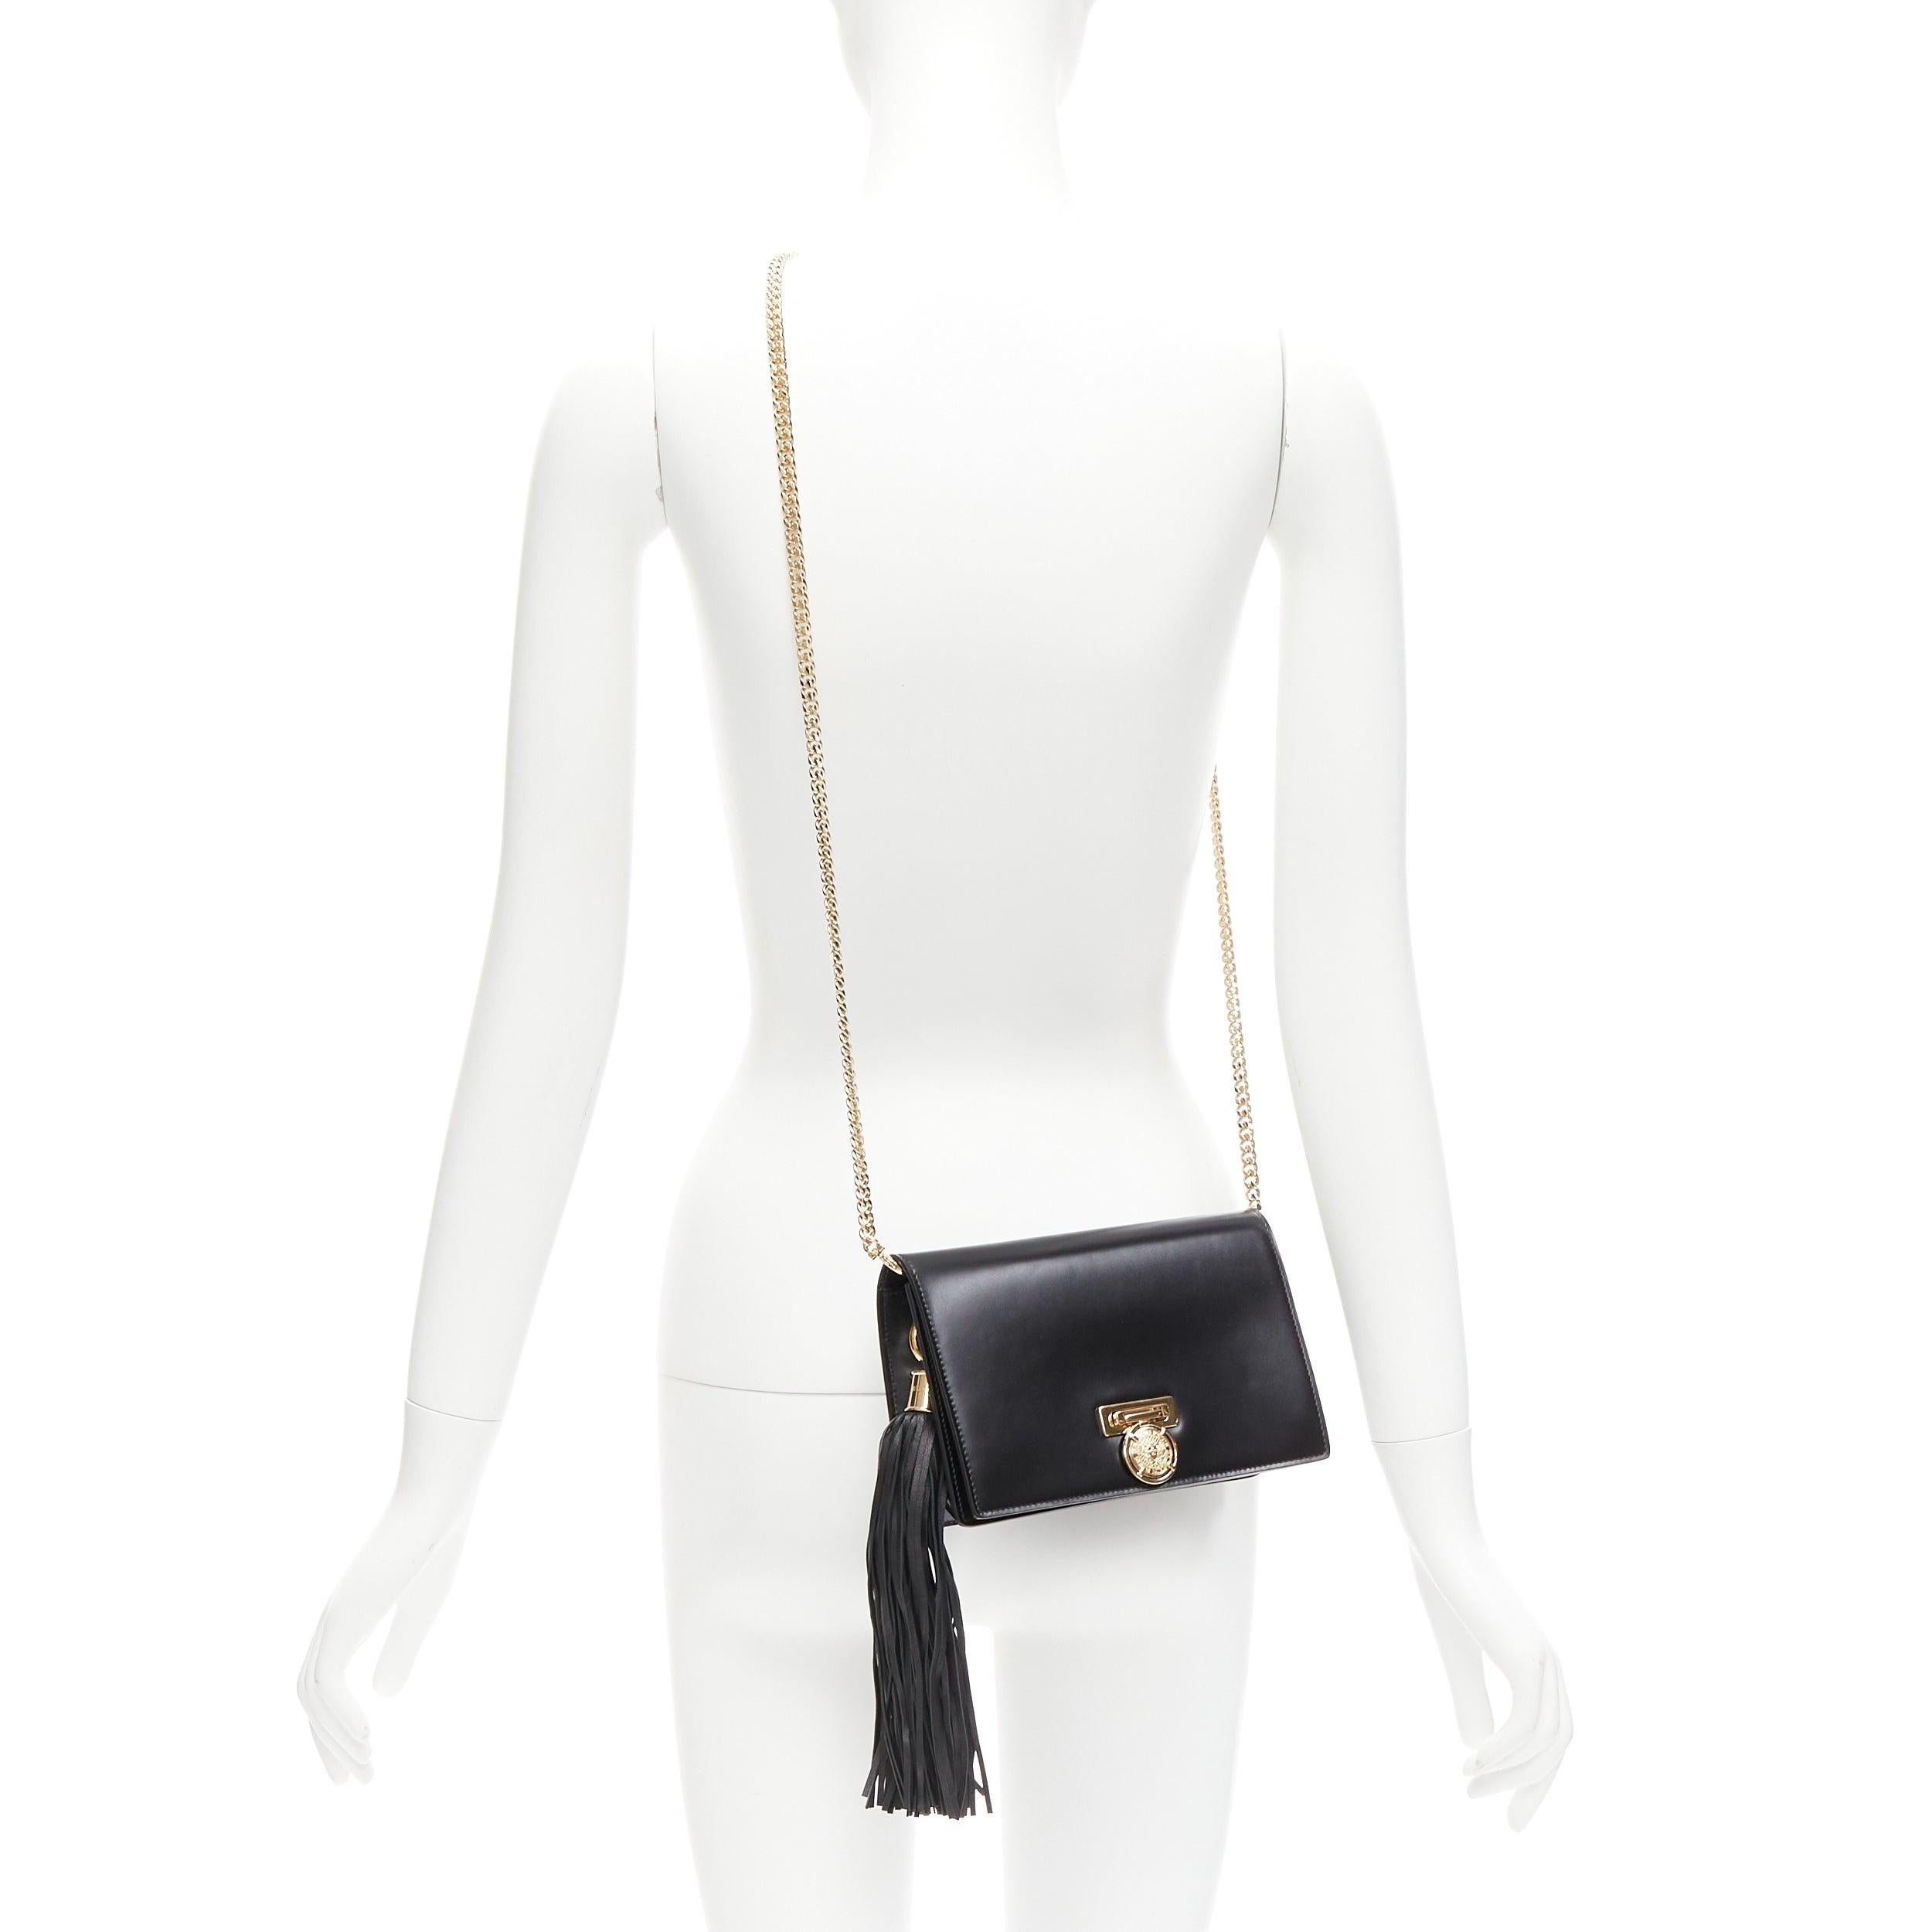 BALMAIN BBox black calfskin leather gold turnlock tassel crossbody clutch bag
Reference: TGAS/D00838
Brand: Balmain
Designer: Olivier Rousteing
Model: BBox
Collection: Runway
Material: Leather, Metal
Color: Black, Gold
Pattern: Solid
Closure: